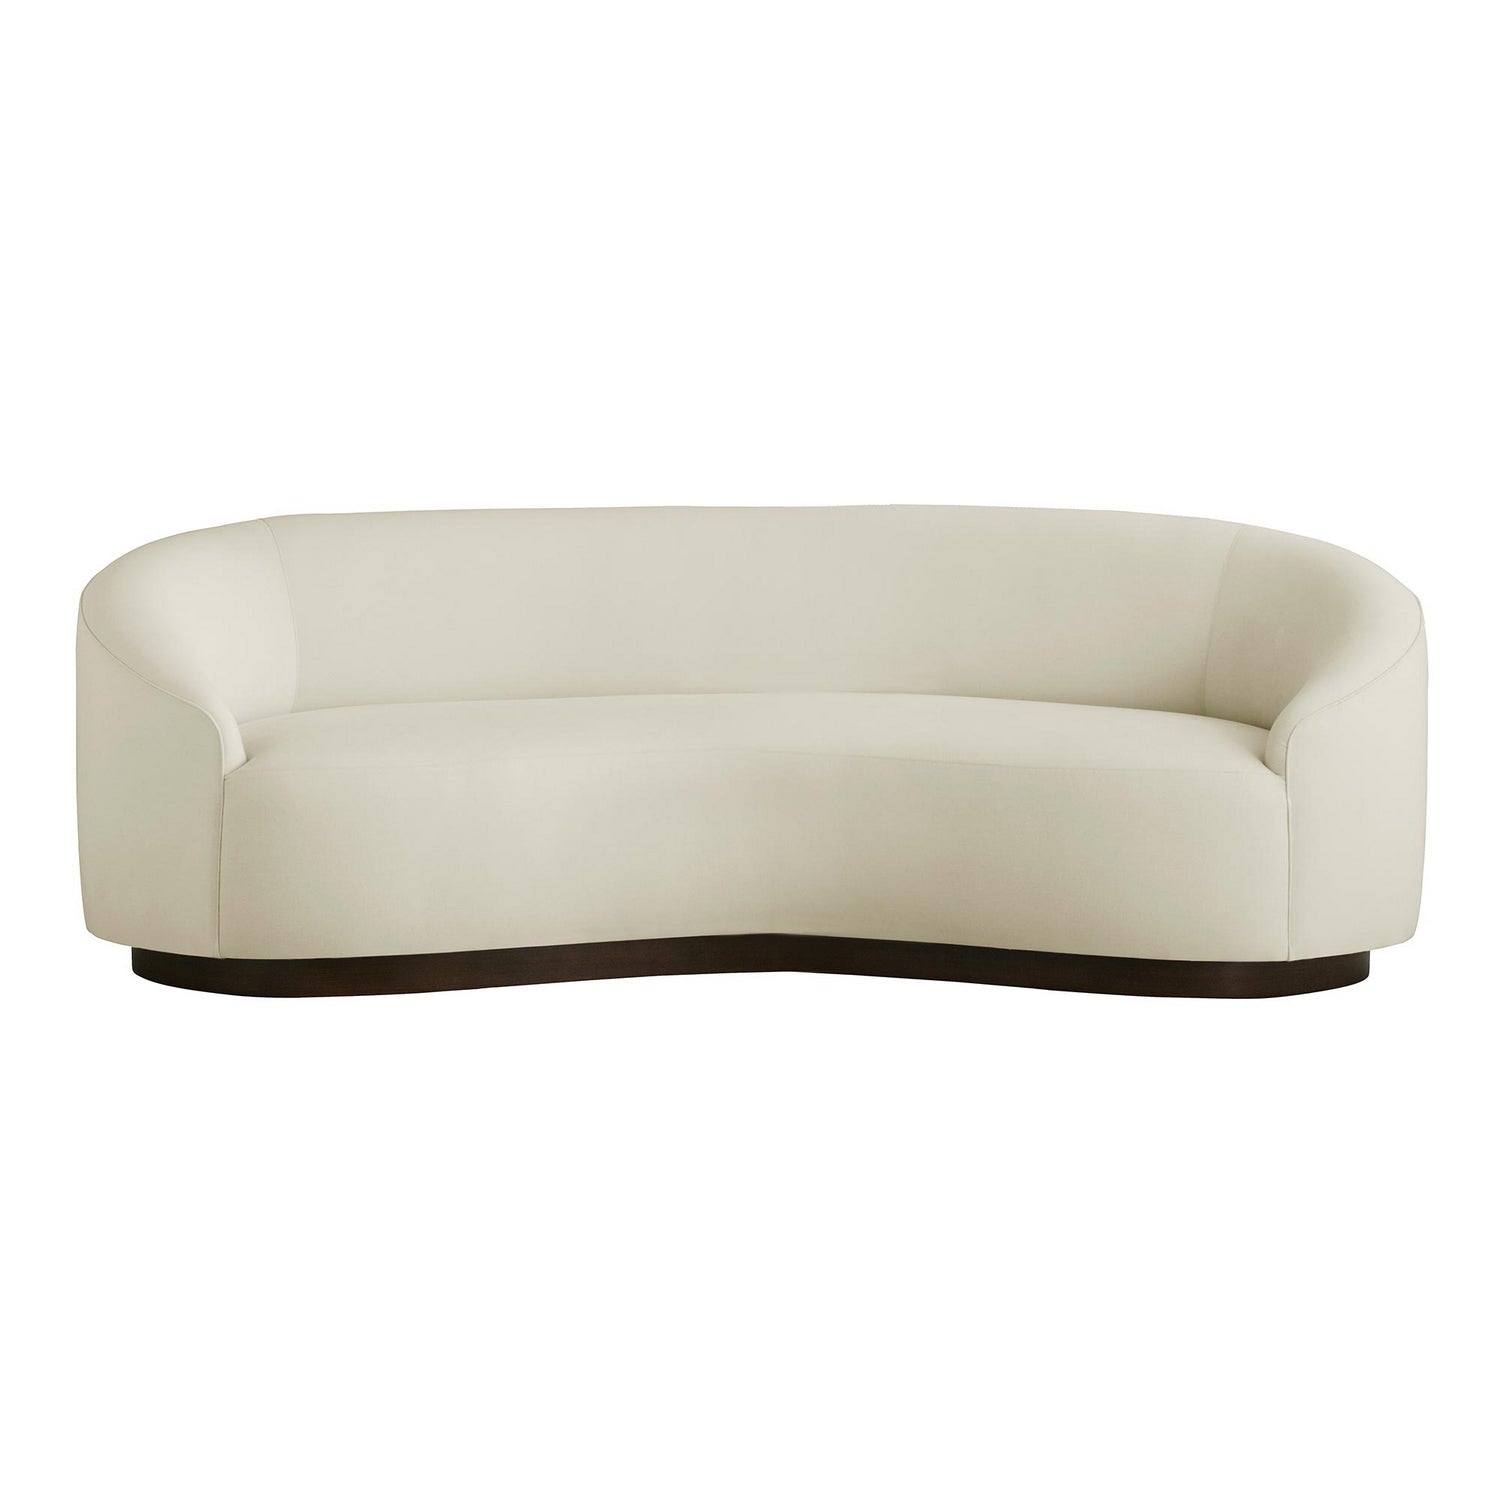 Sofa from the Turner collection in White finish